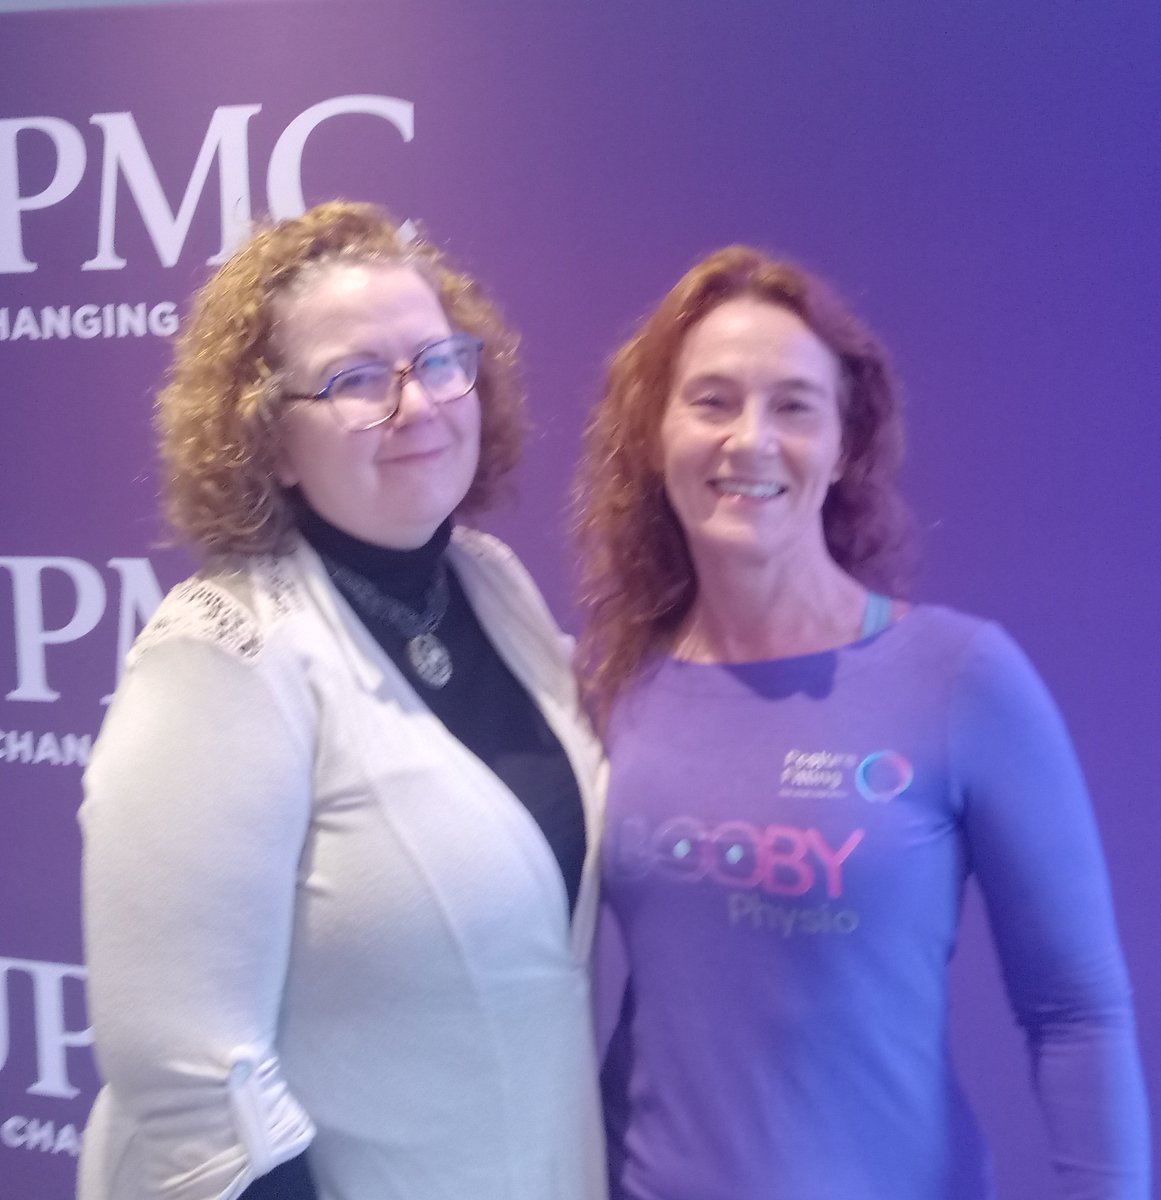 Extra bonuses from a conference: 

- catching up with @MichelleLyons
- hearing my friend @DrNeilWelch speak 
- meeting @DrAoifeLane
- a consultant reviewing his consideration 
of hormonal issues on female patients

Thanks UPMC. 

#women #girls #upmc #SHEResearch #removingbarriers